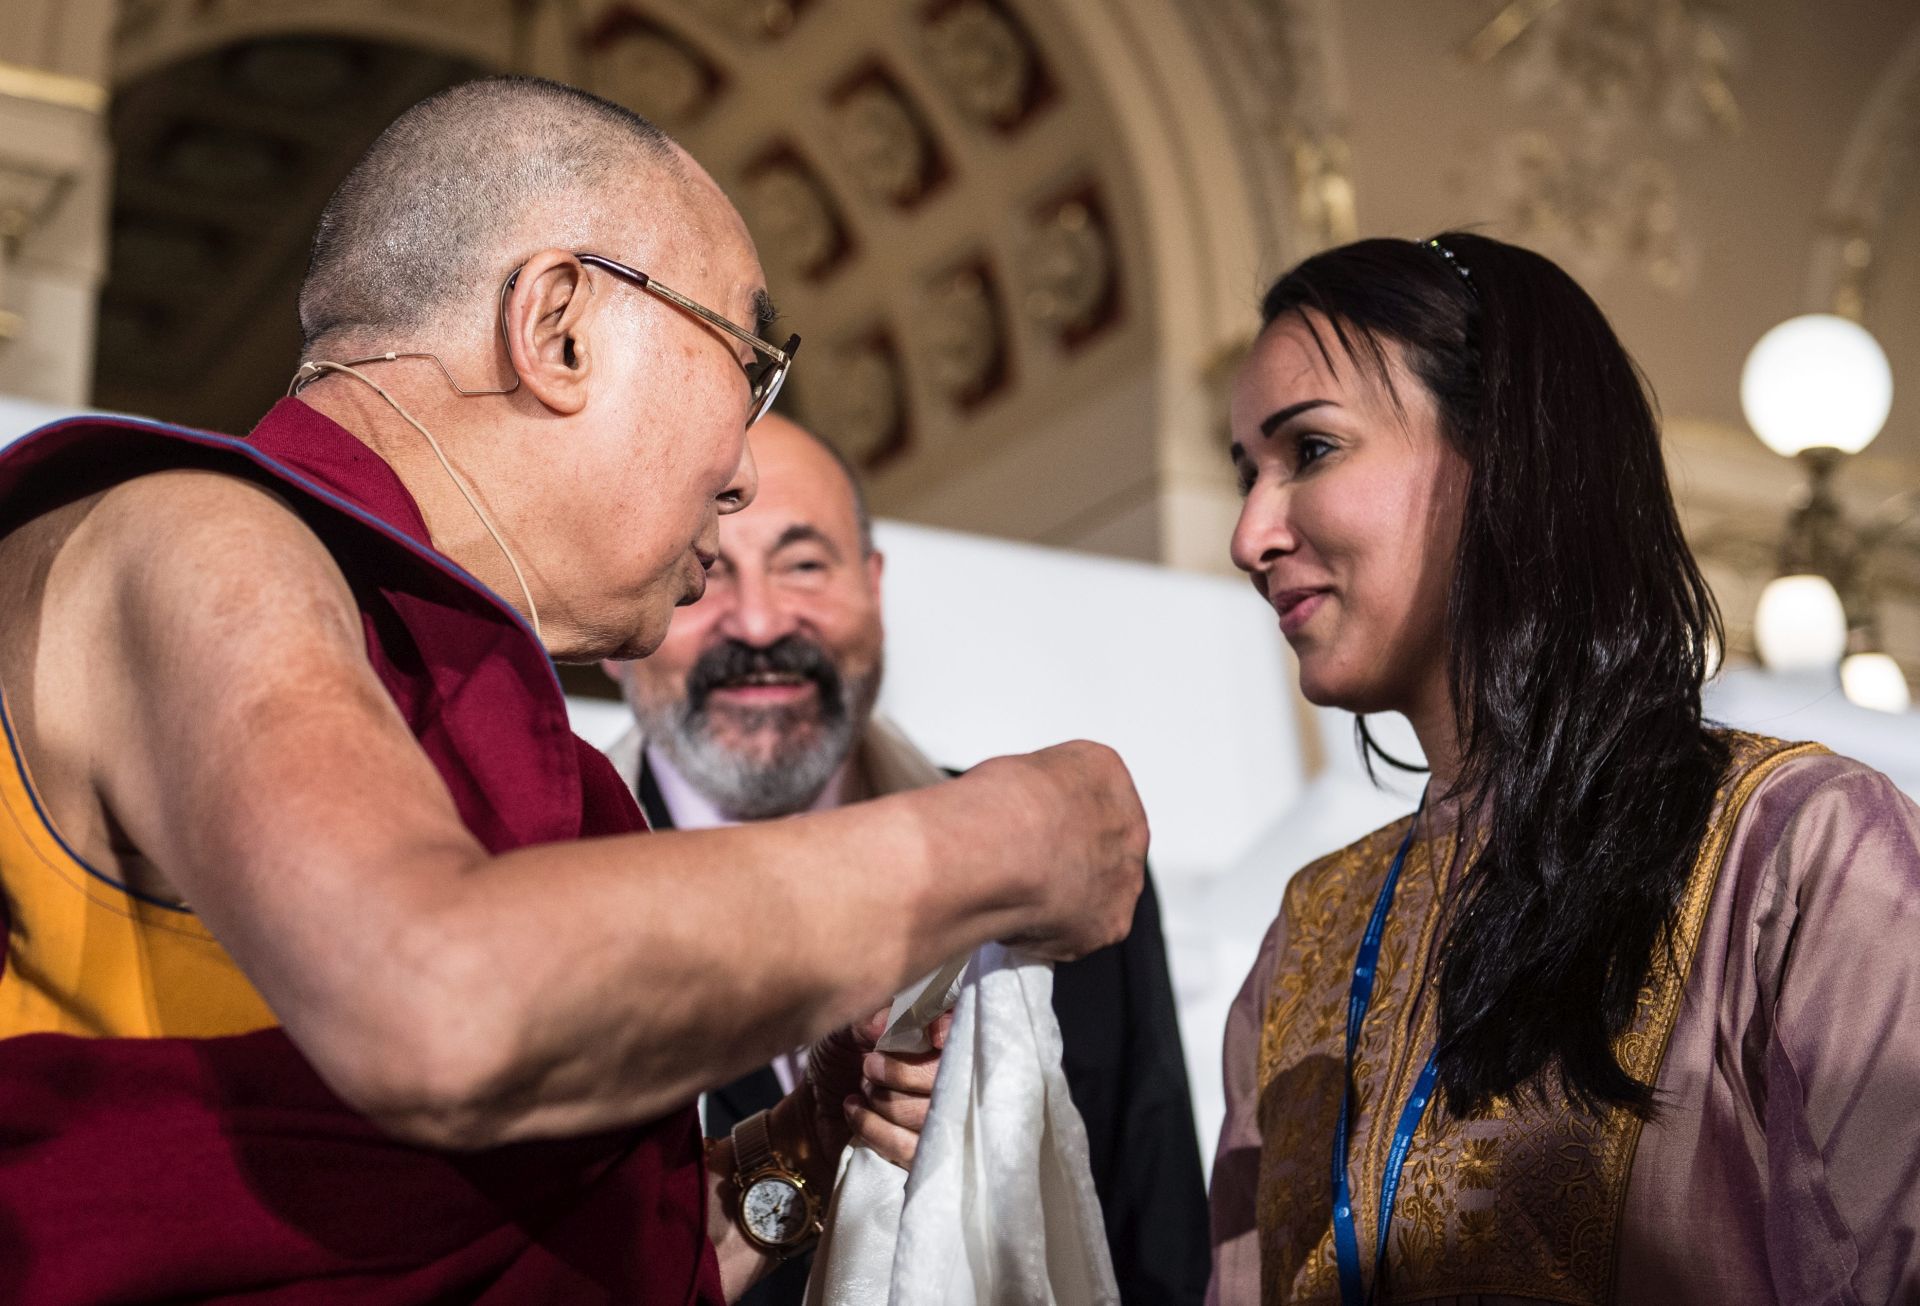 epa05590440 The Tibetans' spiritual leader, the Dalai Lama, Tenzin Gyatso (L), talks with Arabian women's rights activist Manal Al Sharif (R) during the international conference 'Forum 2000' in Prague, Czech Republic, 18 September 2016. Others are not identified. The annual conference convenes global leaders from politics, academia, religion, business and civil society to discuss key issues facing civilization. The theme of this year's conference is 'Courage to Take Responsibility'.  EPA/FILIP SINGER